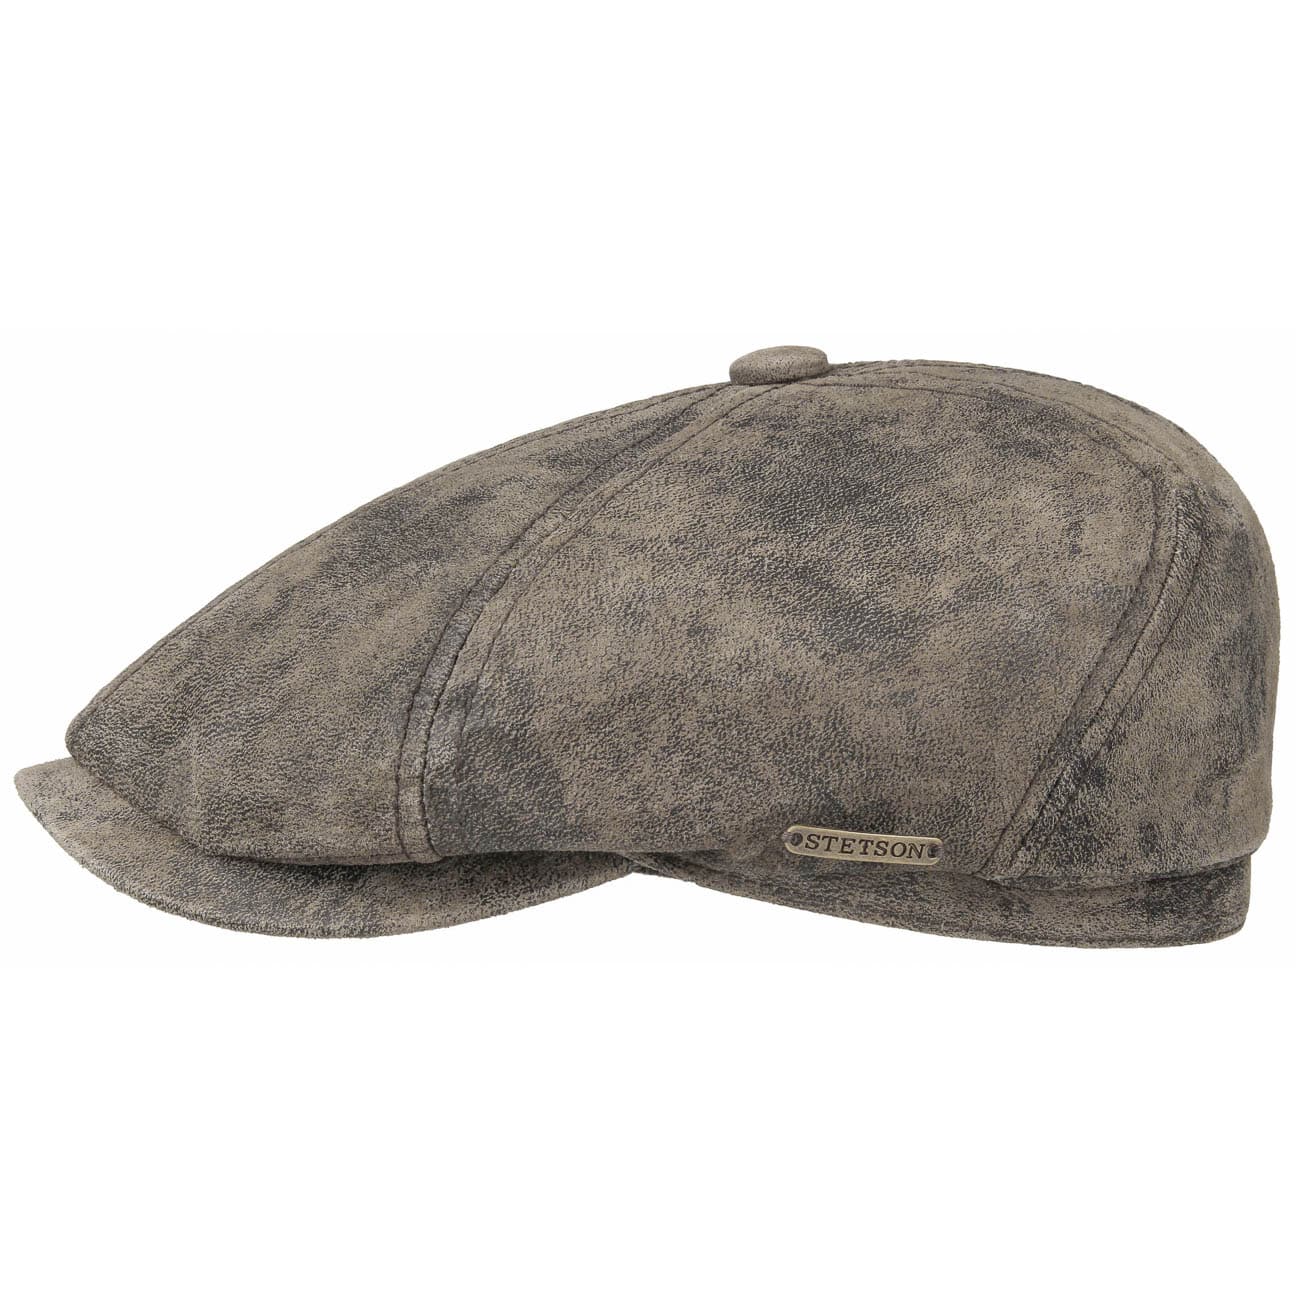 Stetson 6647103-62 Mccook leather cap brown gubbkeps